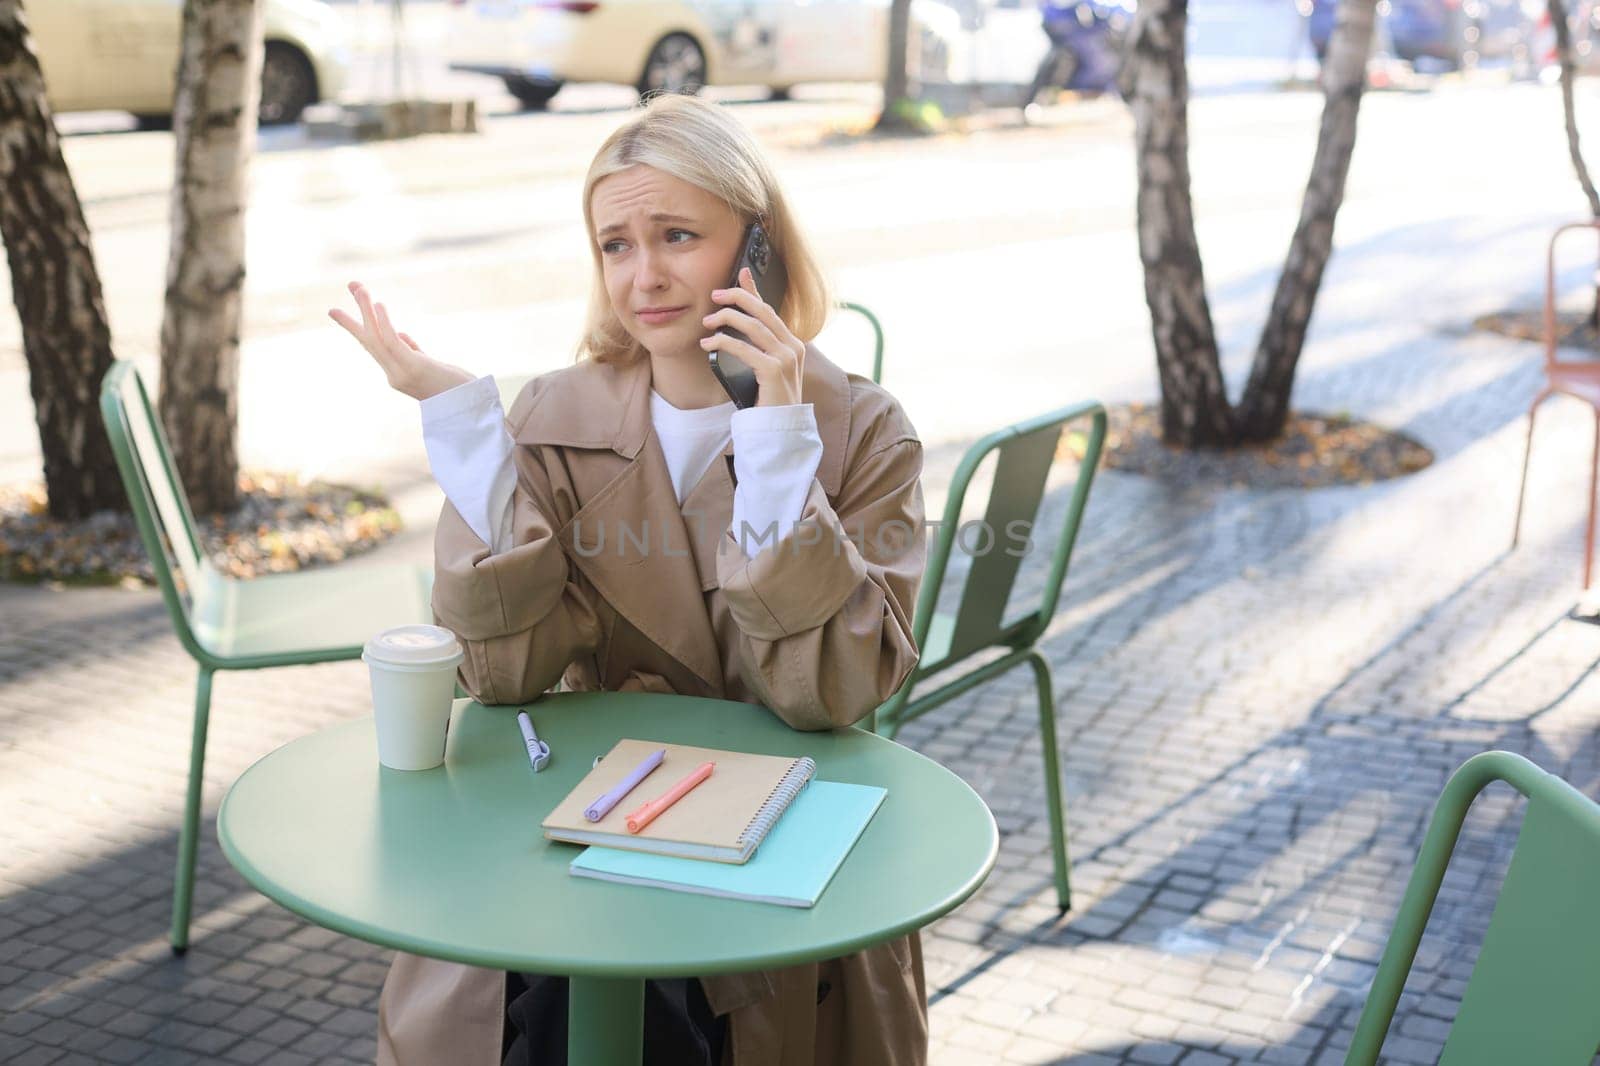 Image of young upset woman in cafe, talking on mobile phone with sad, disappointed face expression, raising hand up unhappy.